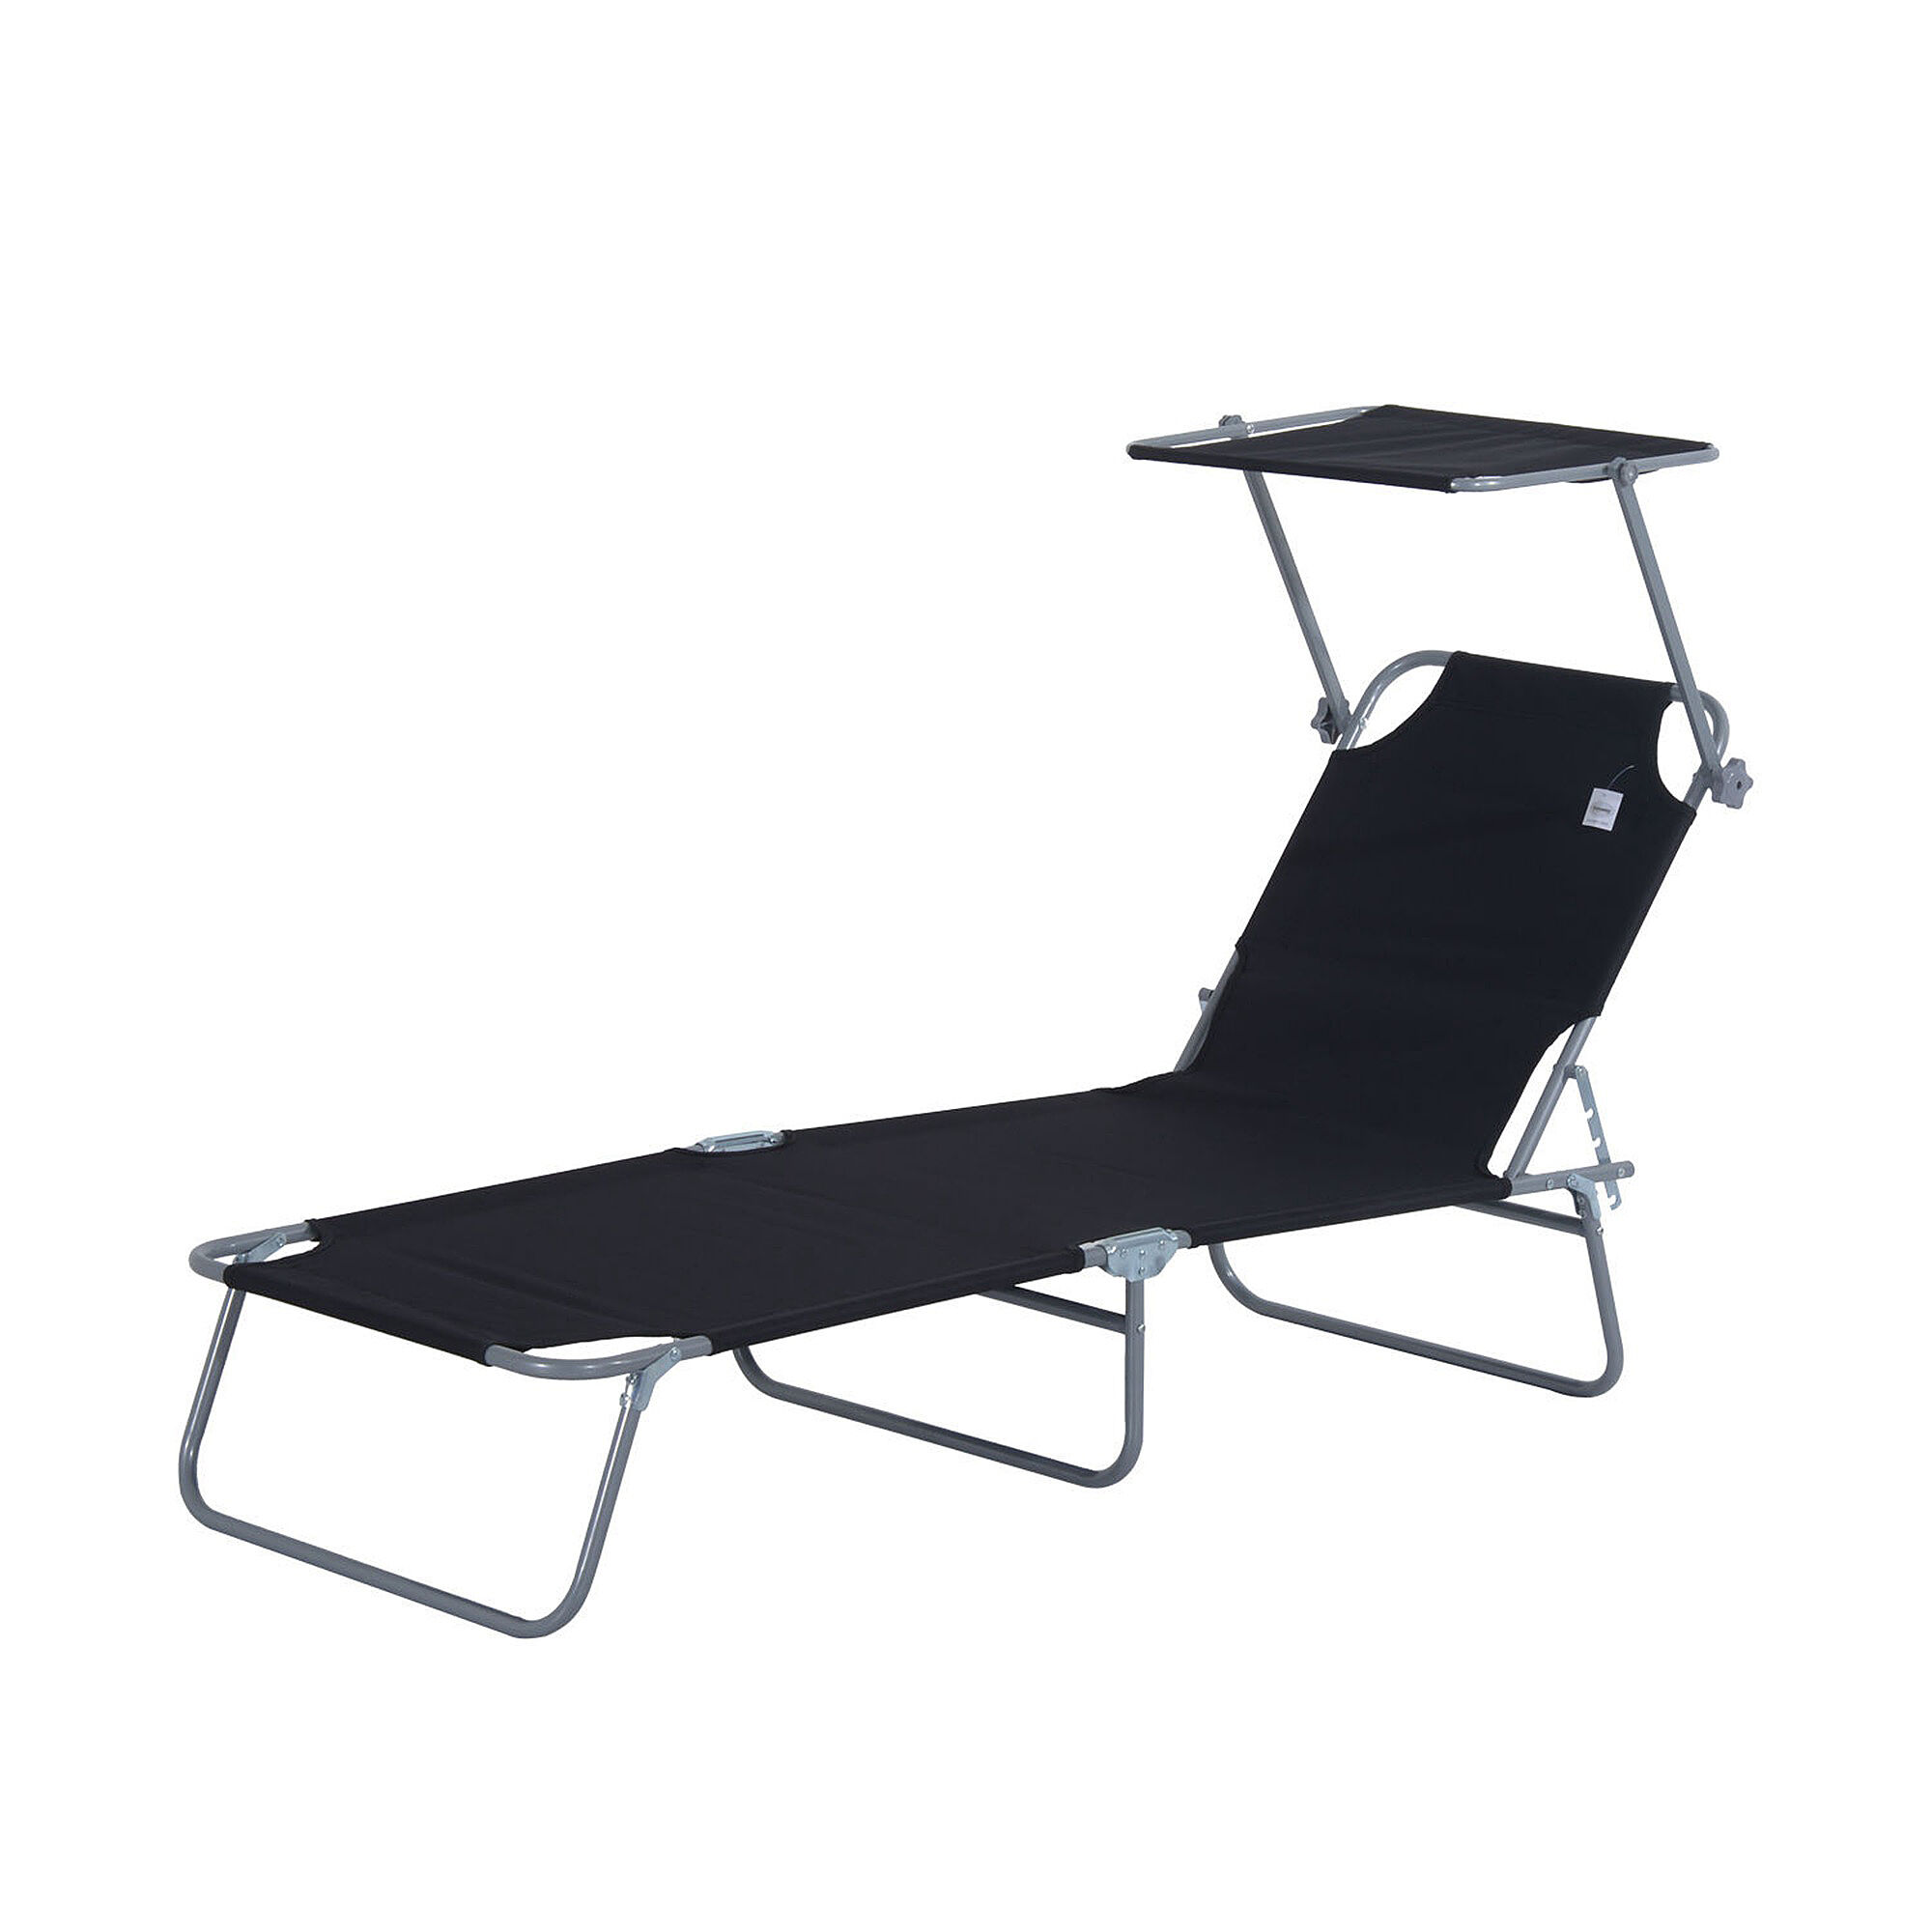 Outsunny Folding Outdoor Pool Chaise Lounge Chair Tanning Chair with Sun Shade Comfortable Patio Furniture   Aosom.com